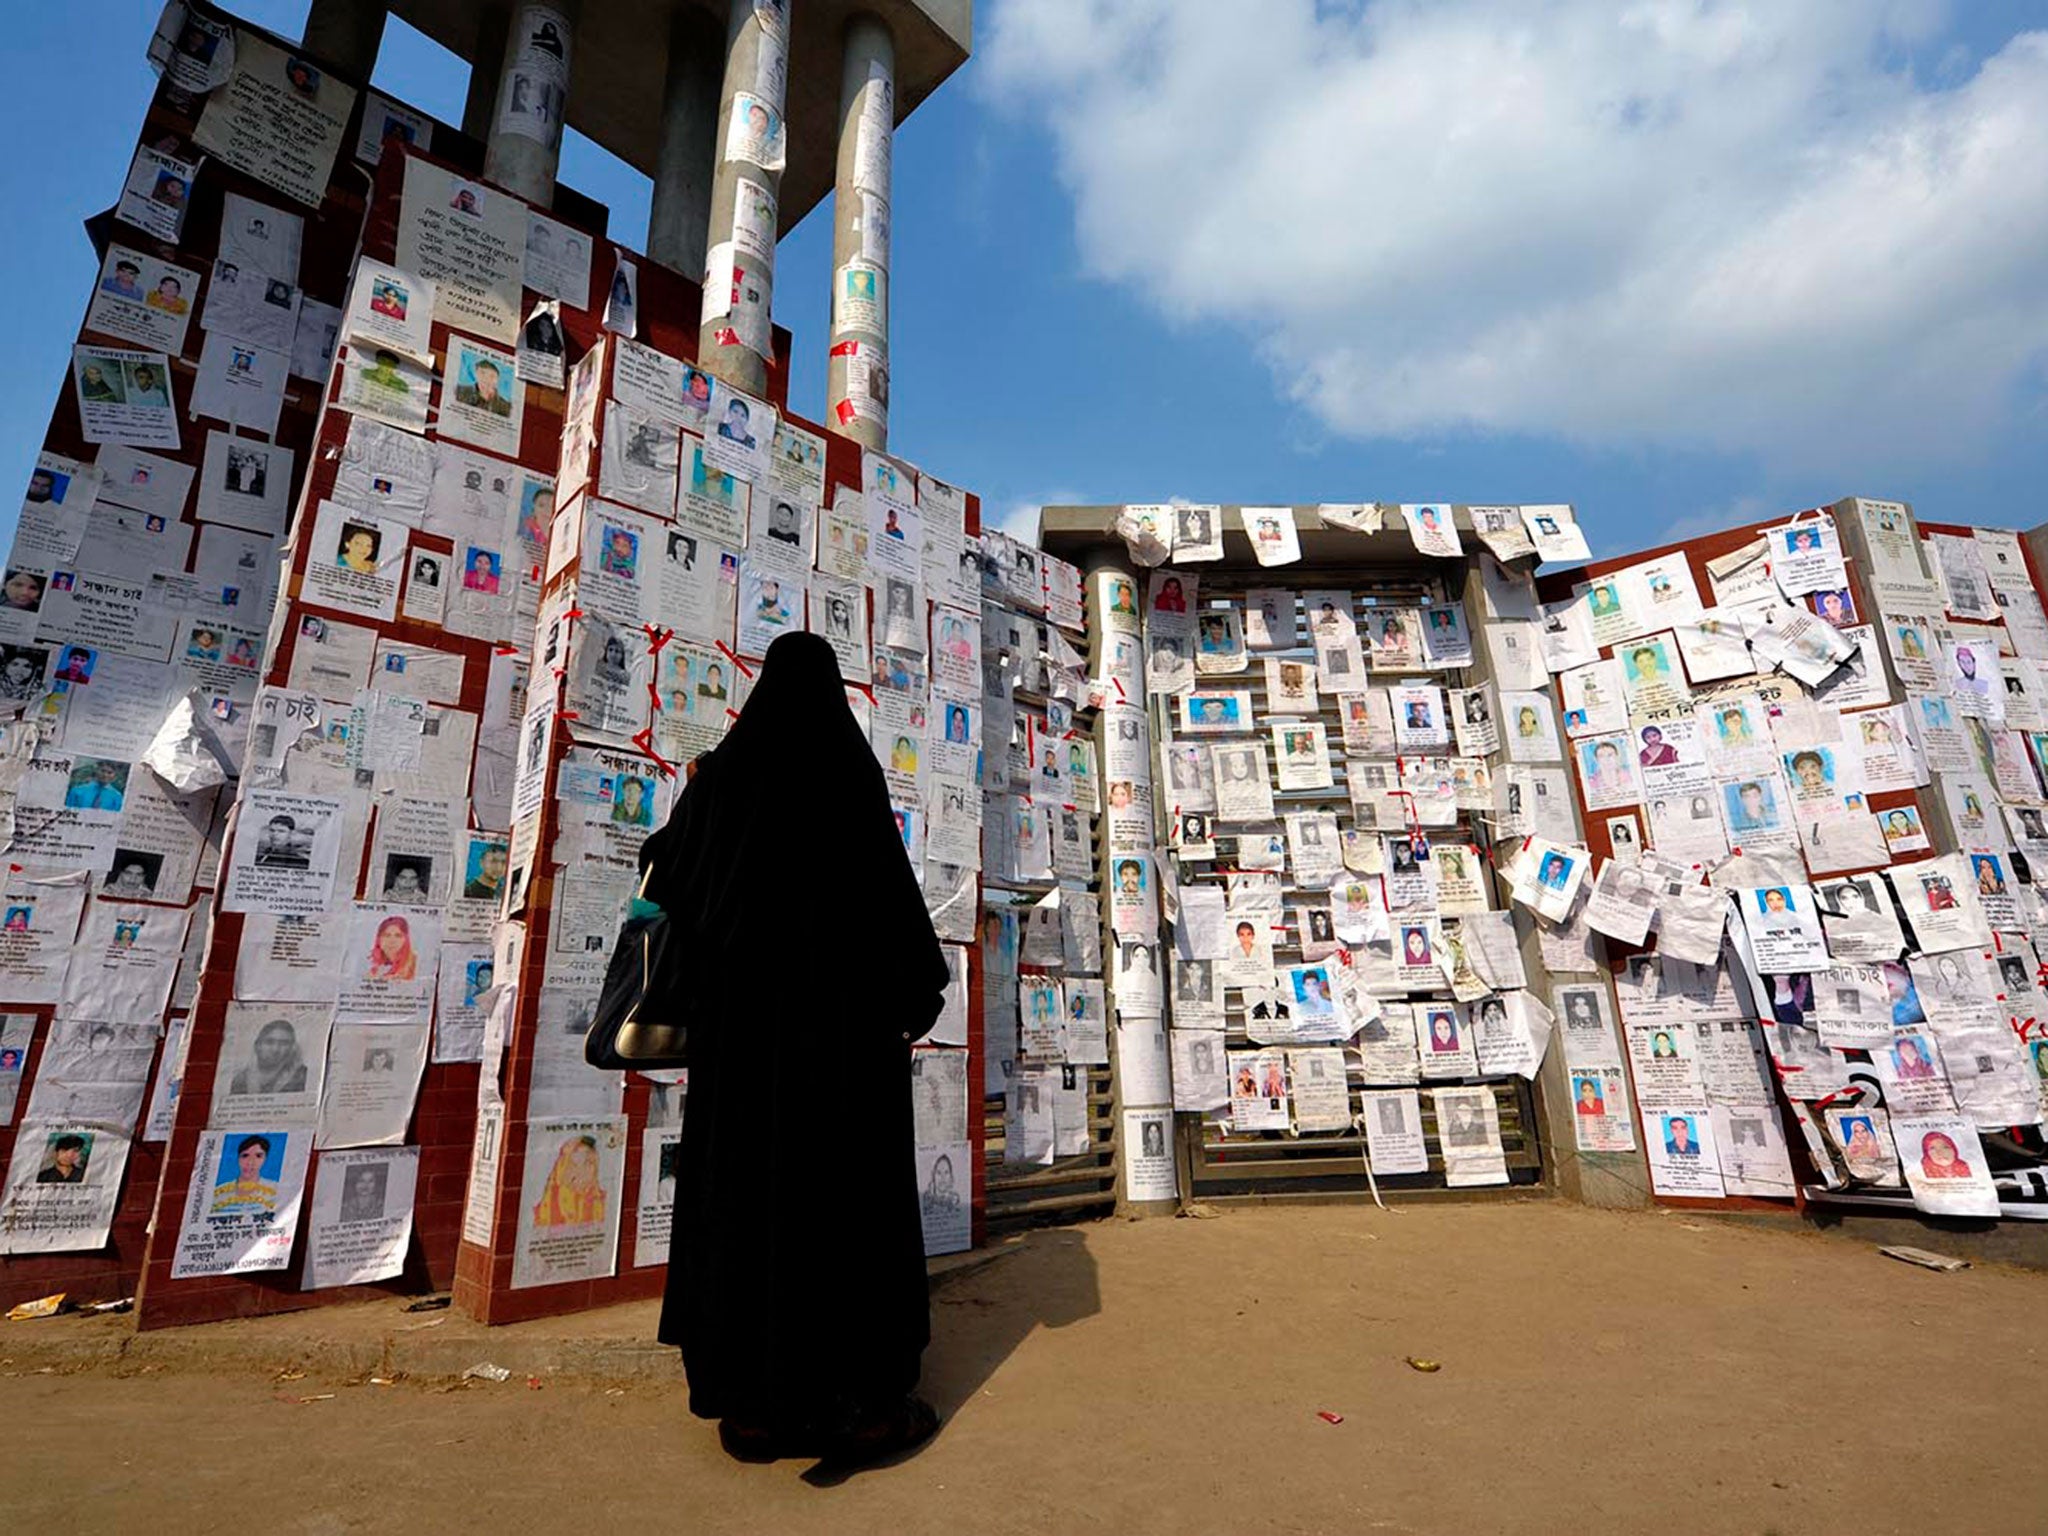 A women looks at the photos of missing Rana Plaza victims pasted up on the wall of Adhar Chandra High School in Savar © Khorshed Alam Rinku